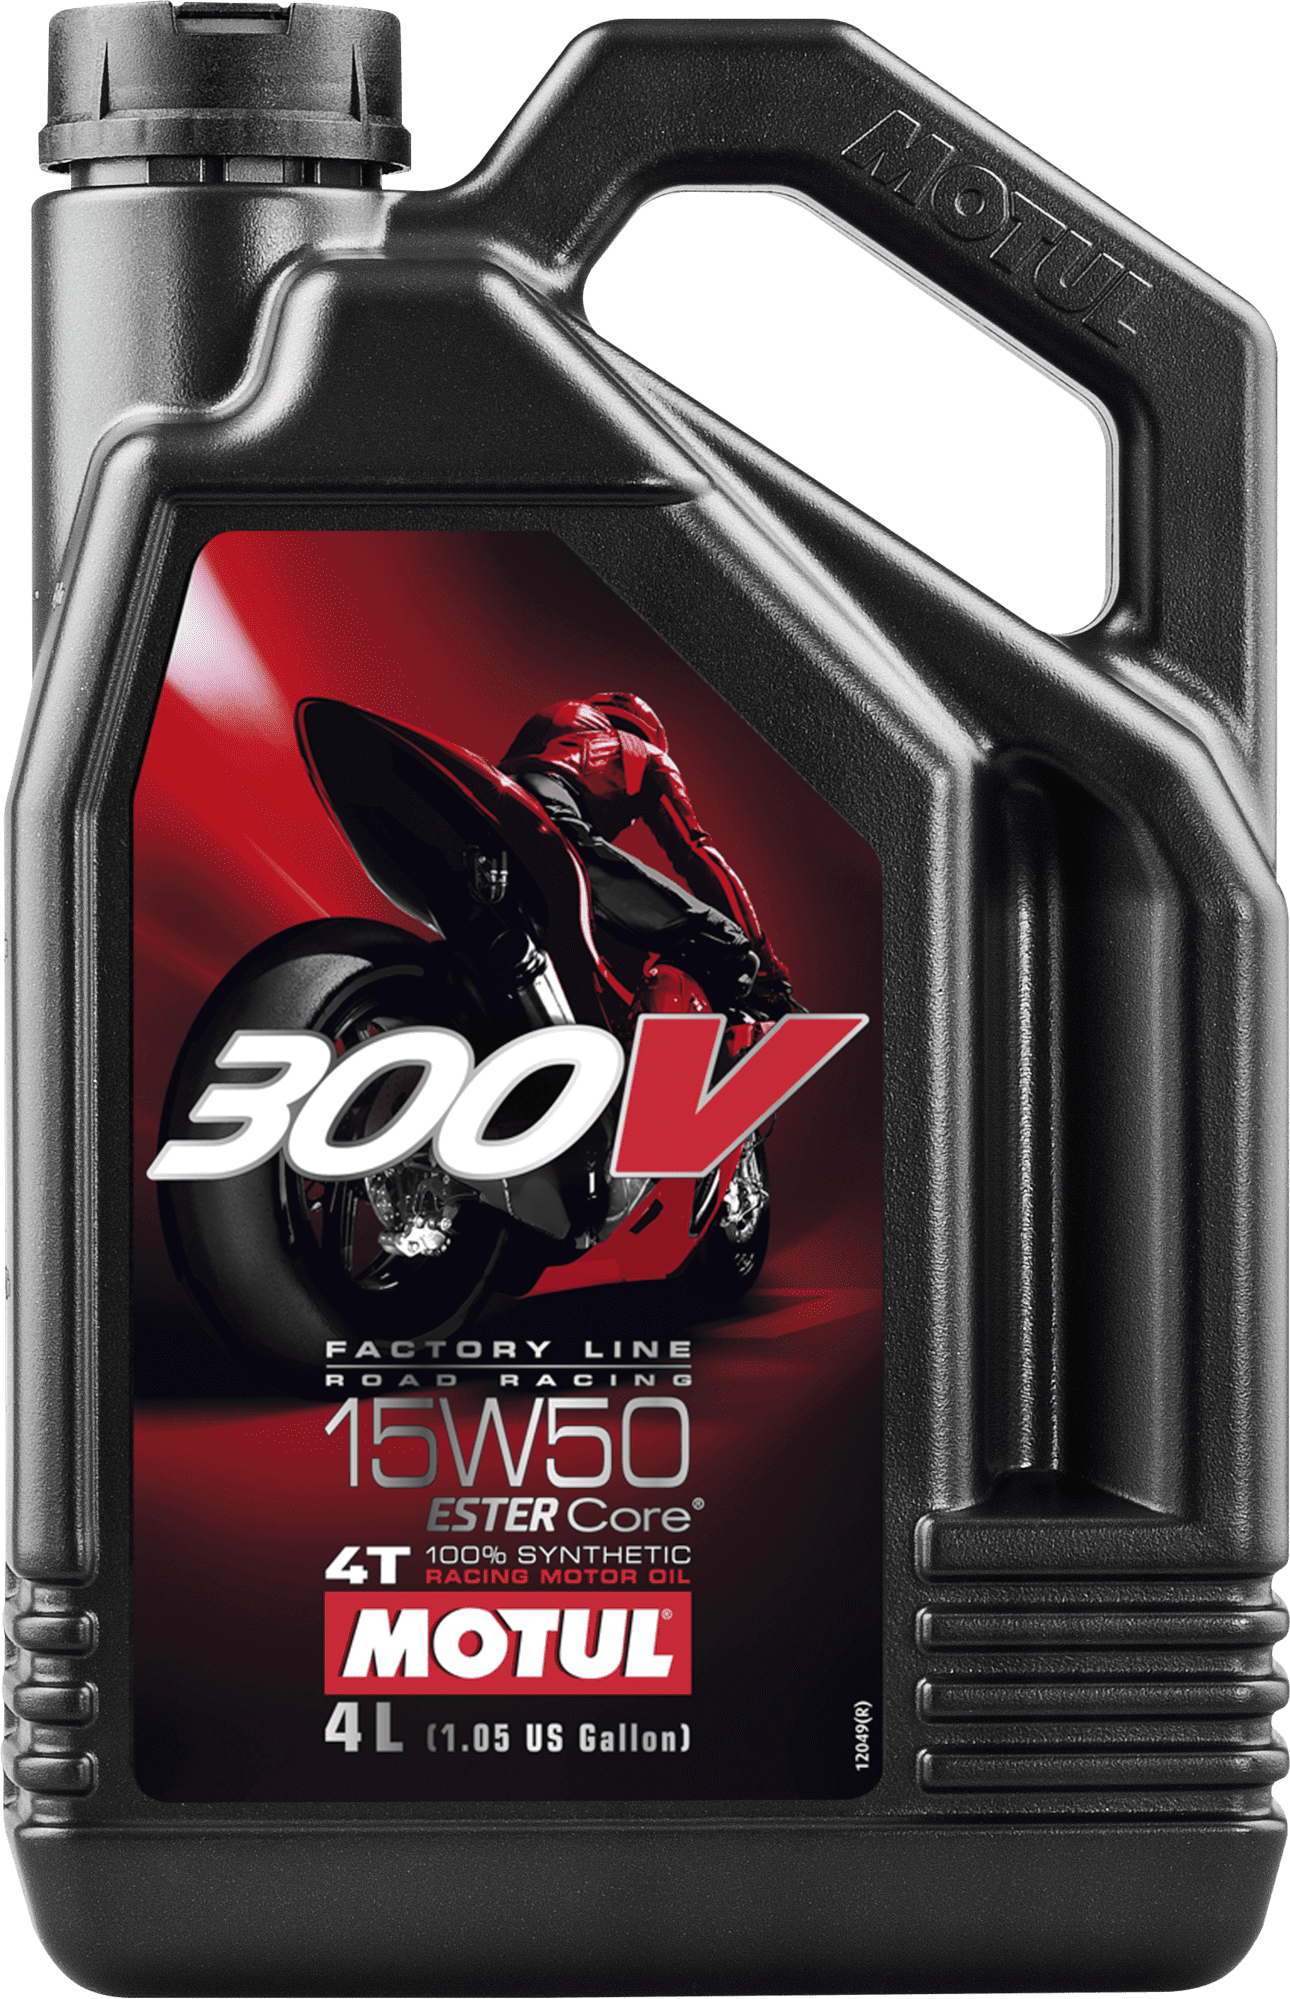 104129-4 100% Synthetic racing motor oil. Based on ESTER Core® technology and above all existing motorsport standards.